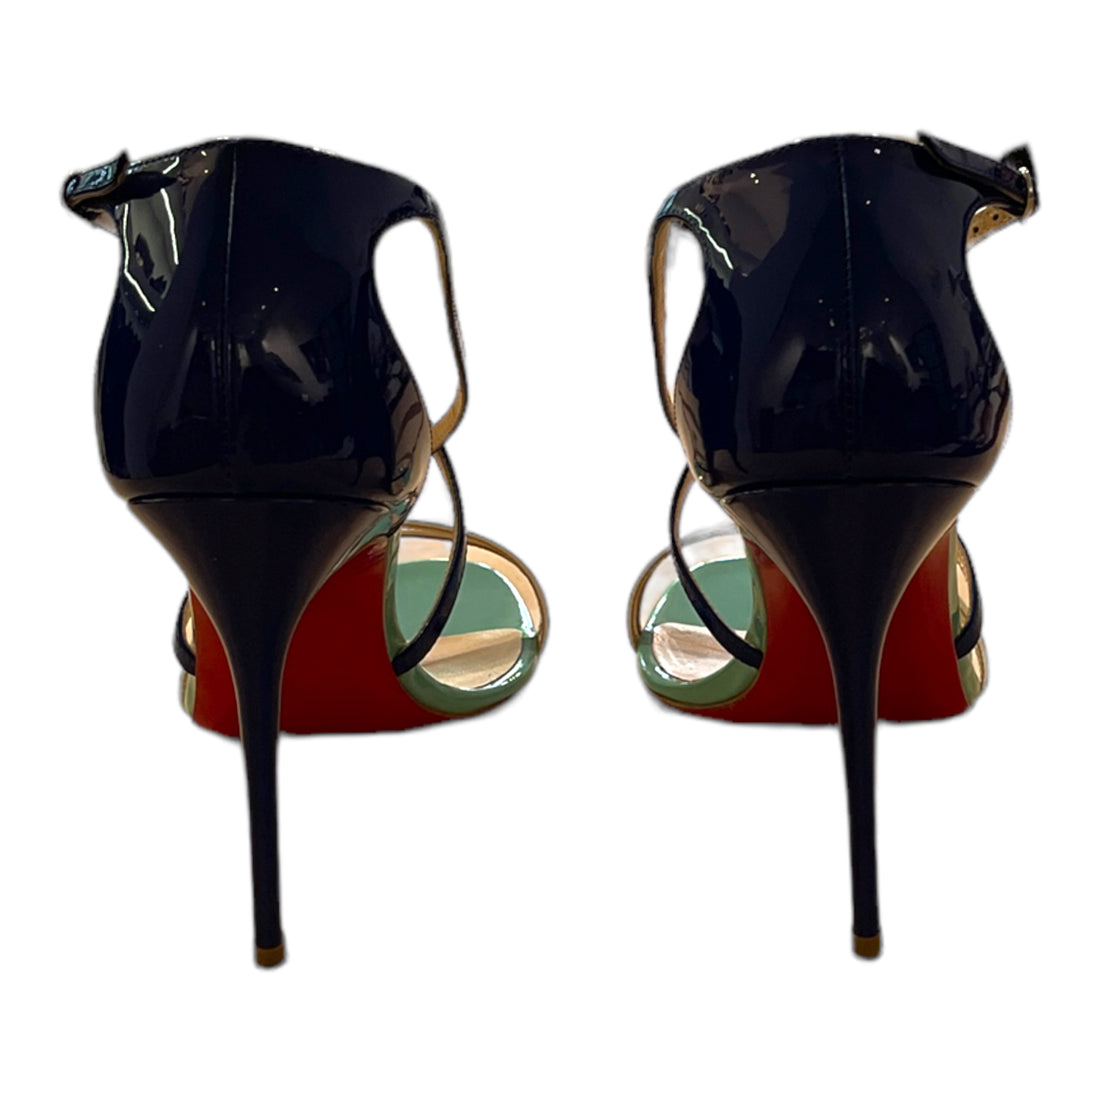 Christian Louboutin stiletto high heel sandals in patent leather